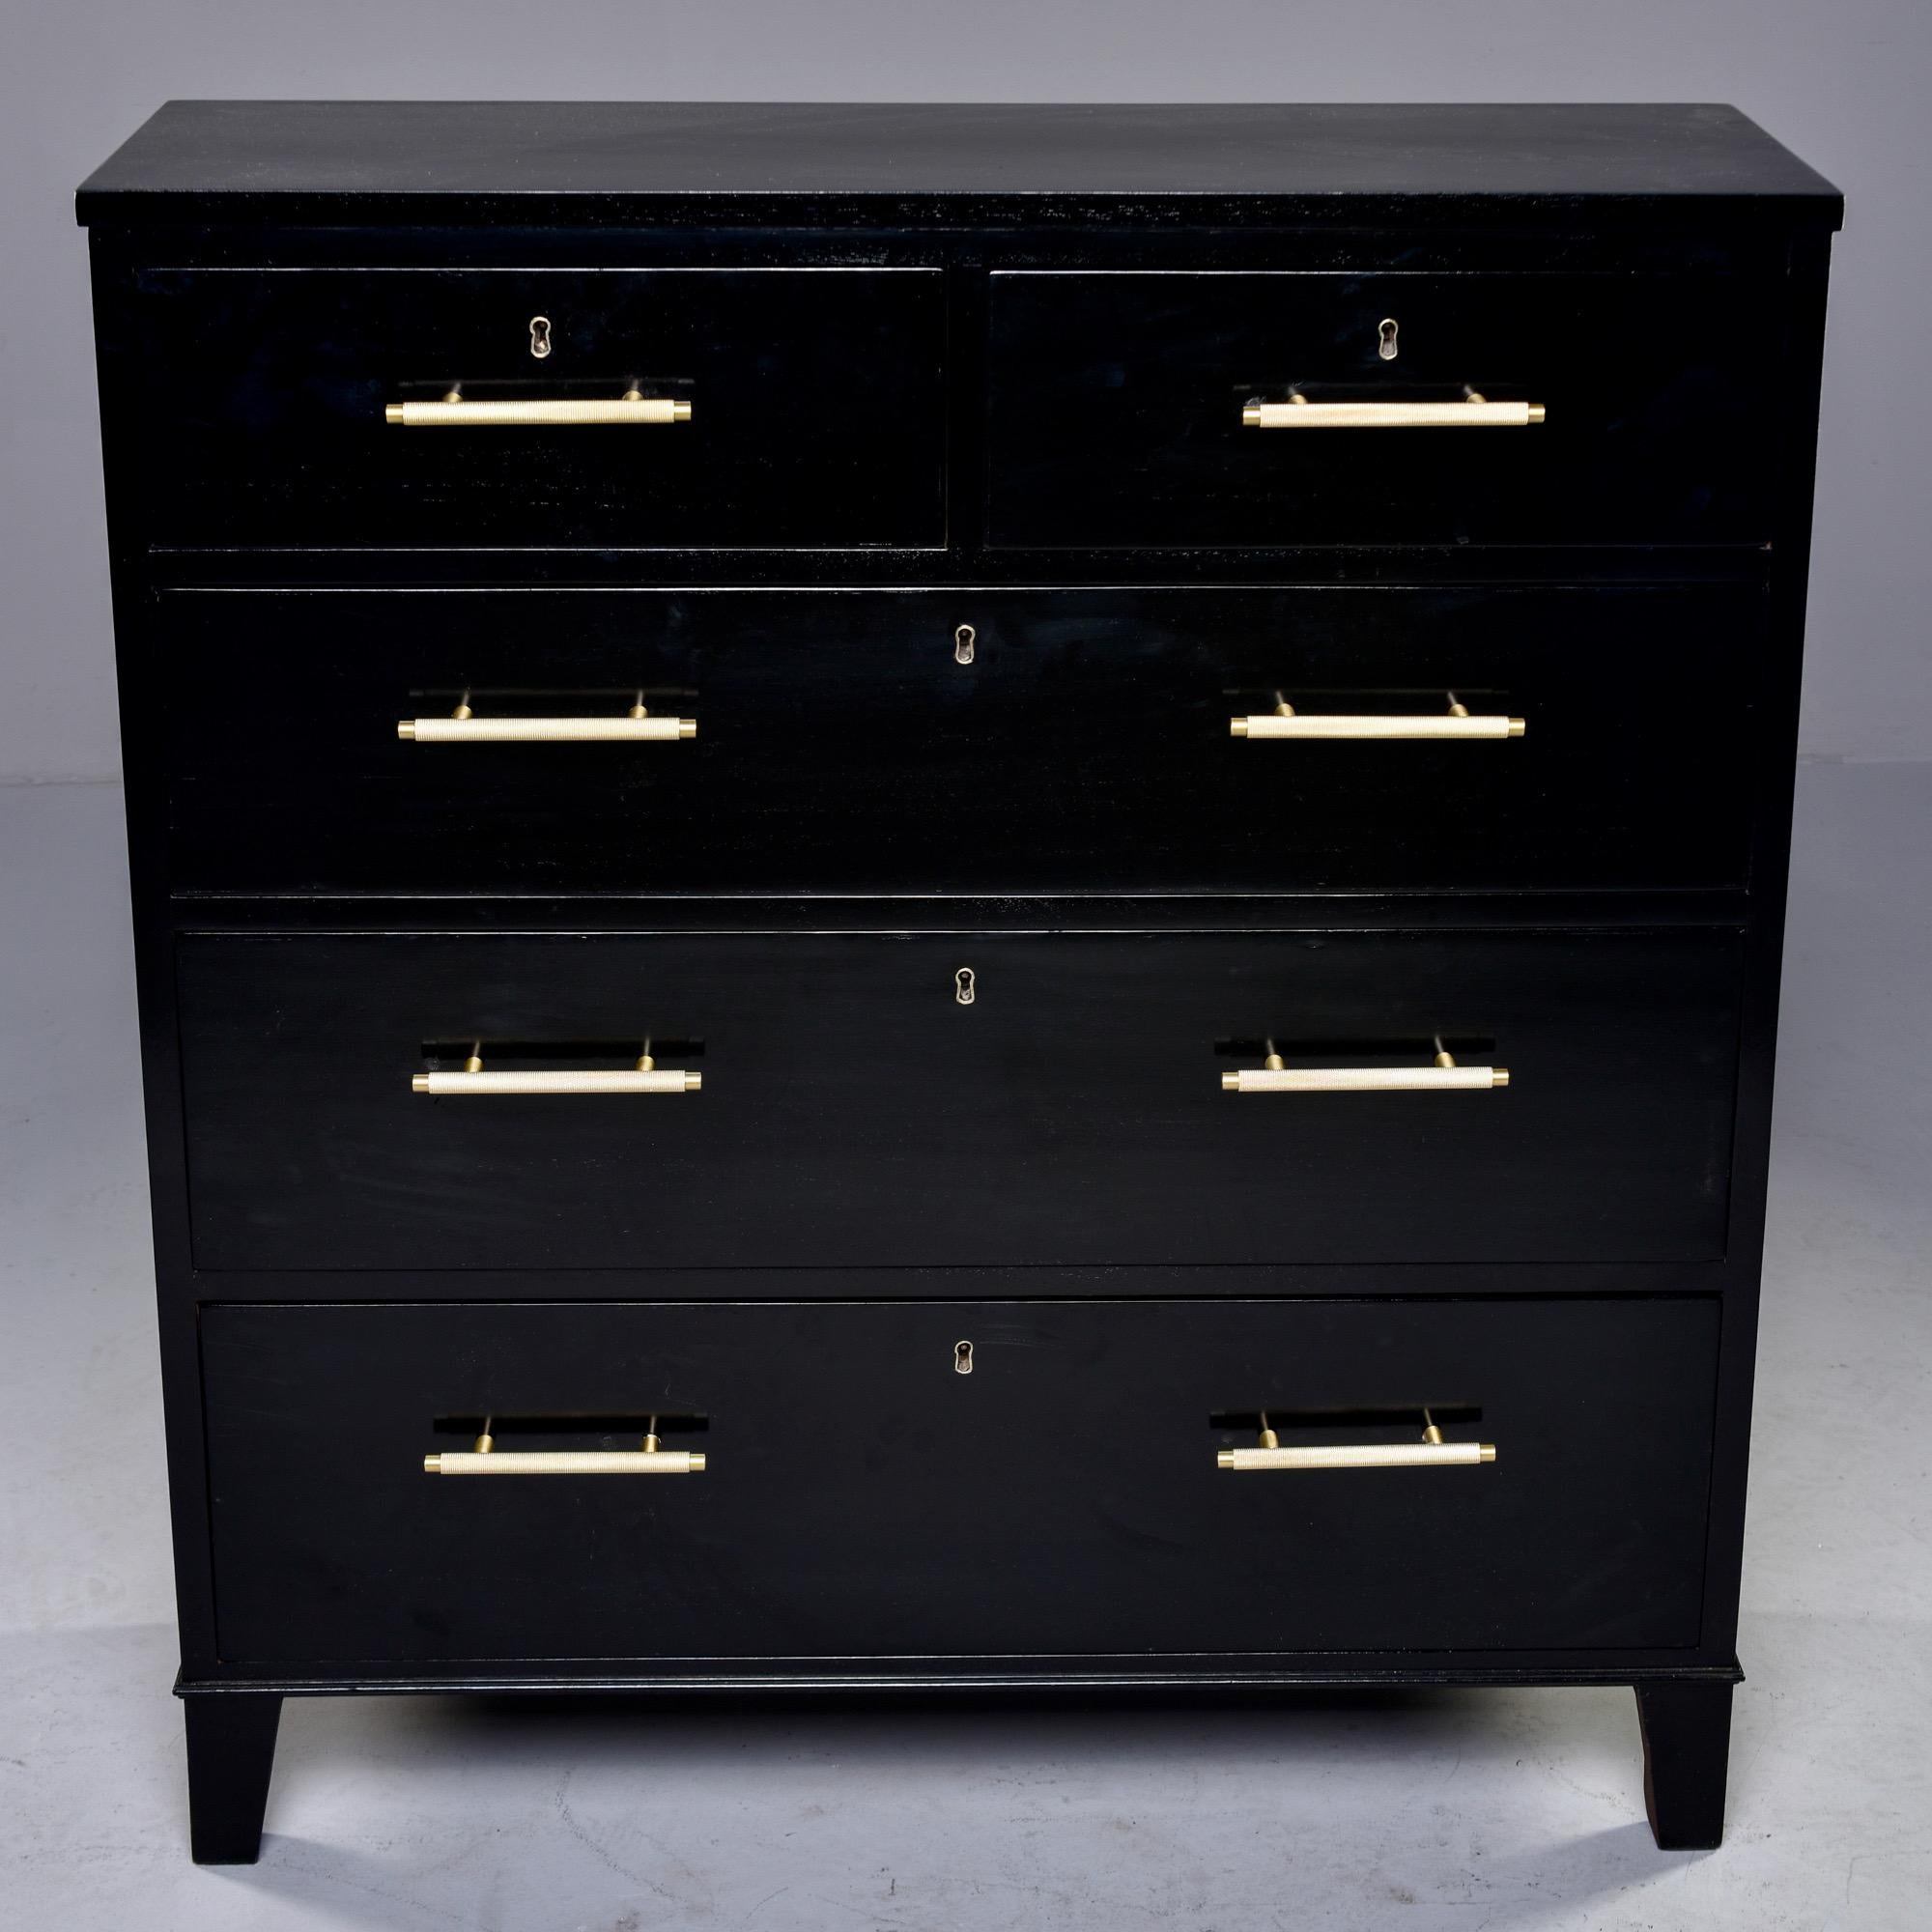 Circa 1940s chest of drawers in mahogany found in England where we had a new, ebonized finish professionally applied. Drawers have dovetail construction, new brass hardware, working lock and key. Unknown maker.